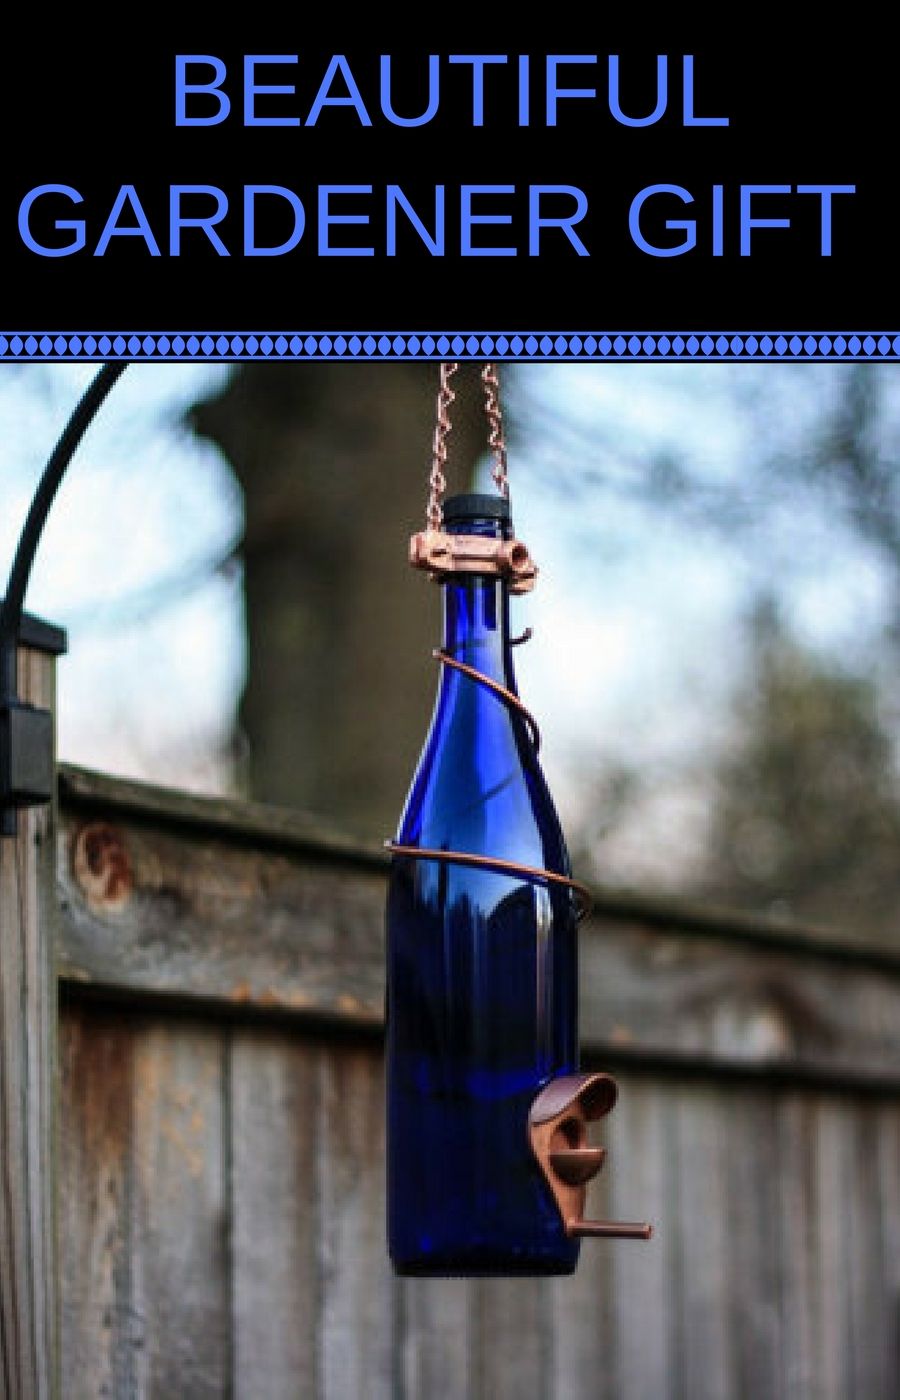 This wine bottle bird feeder is the perfect gift for ...